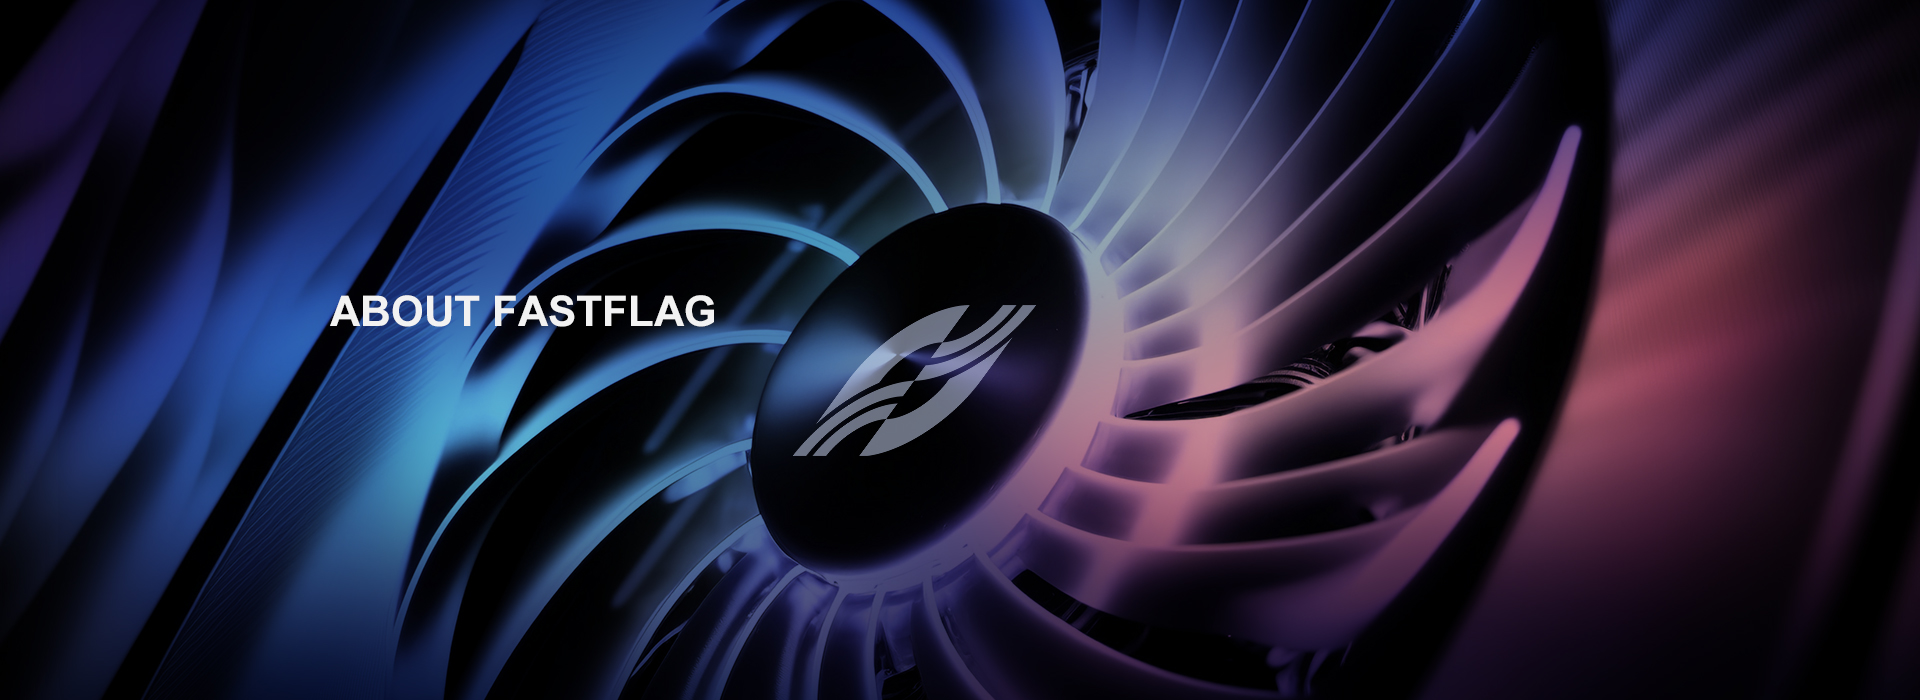 About FASTFLAG